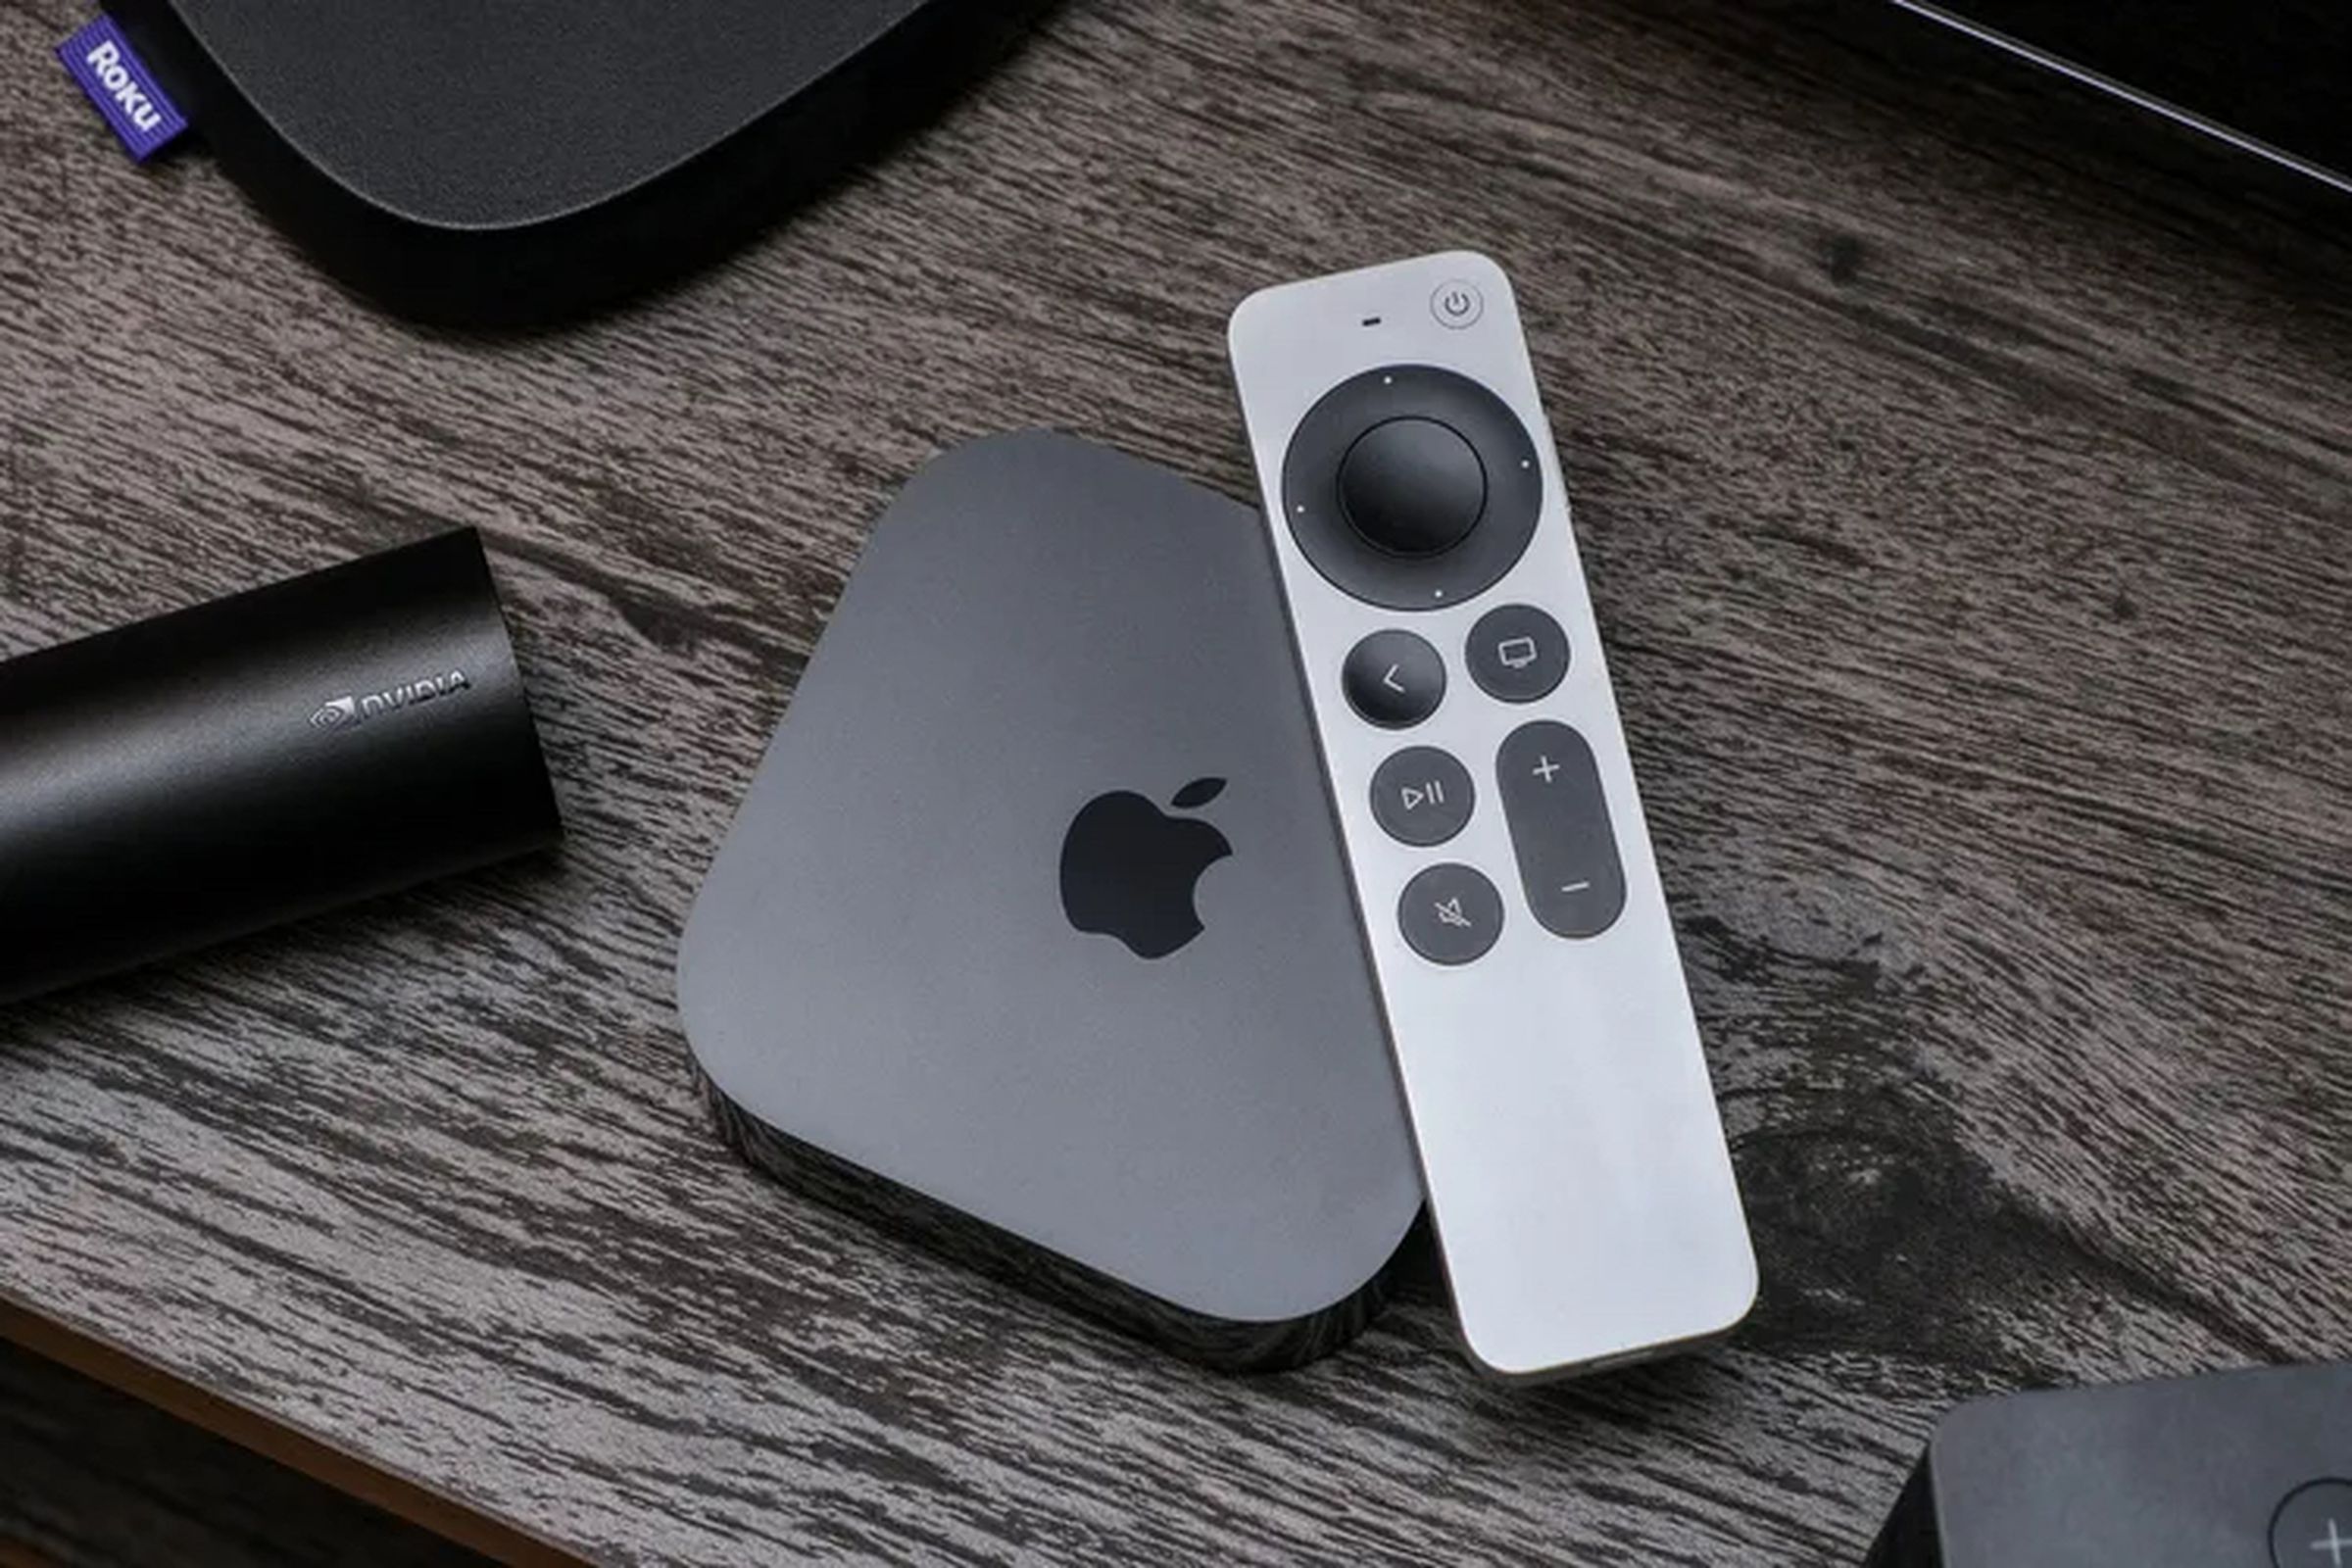 The new Apple TV 4K Wi-Fi + Ethernet is a Matter controller and Thread border router.